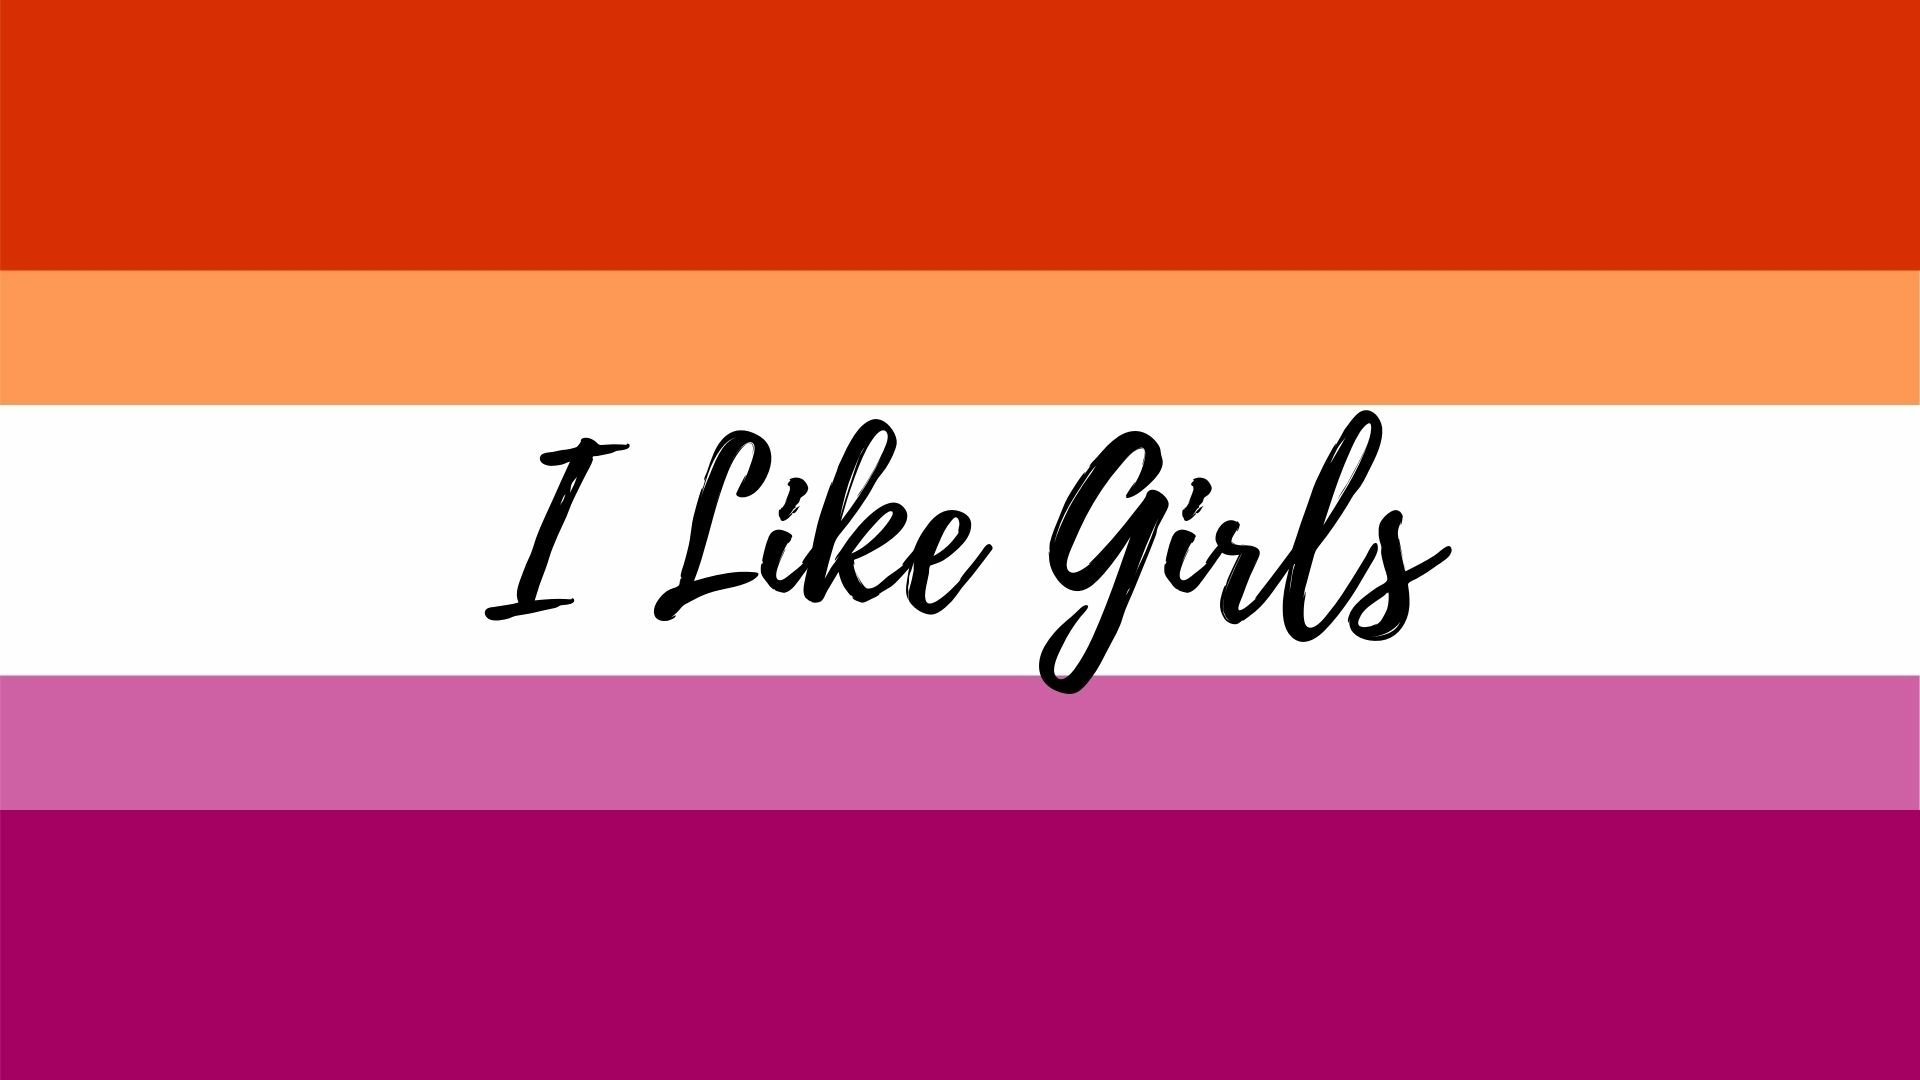 lesbian flag designs are available in fabric by the yard, Lesbian Wallpaper by th...